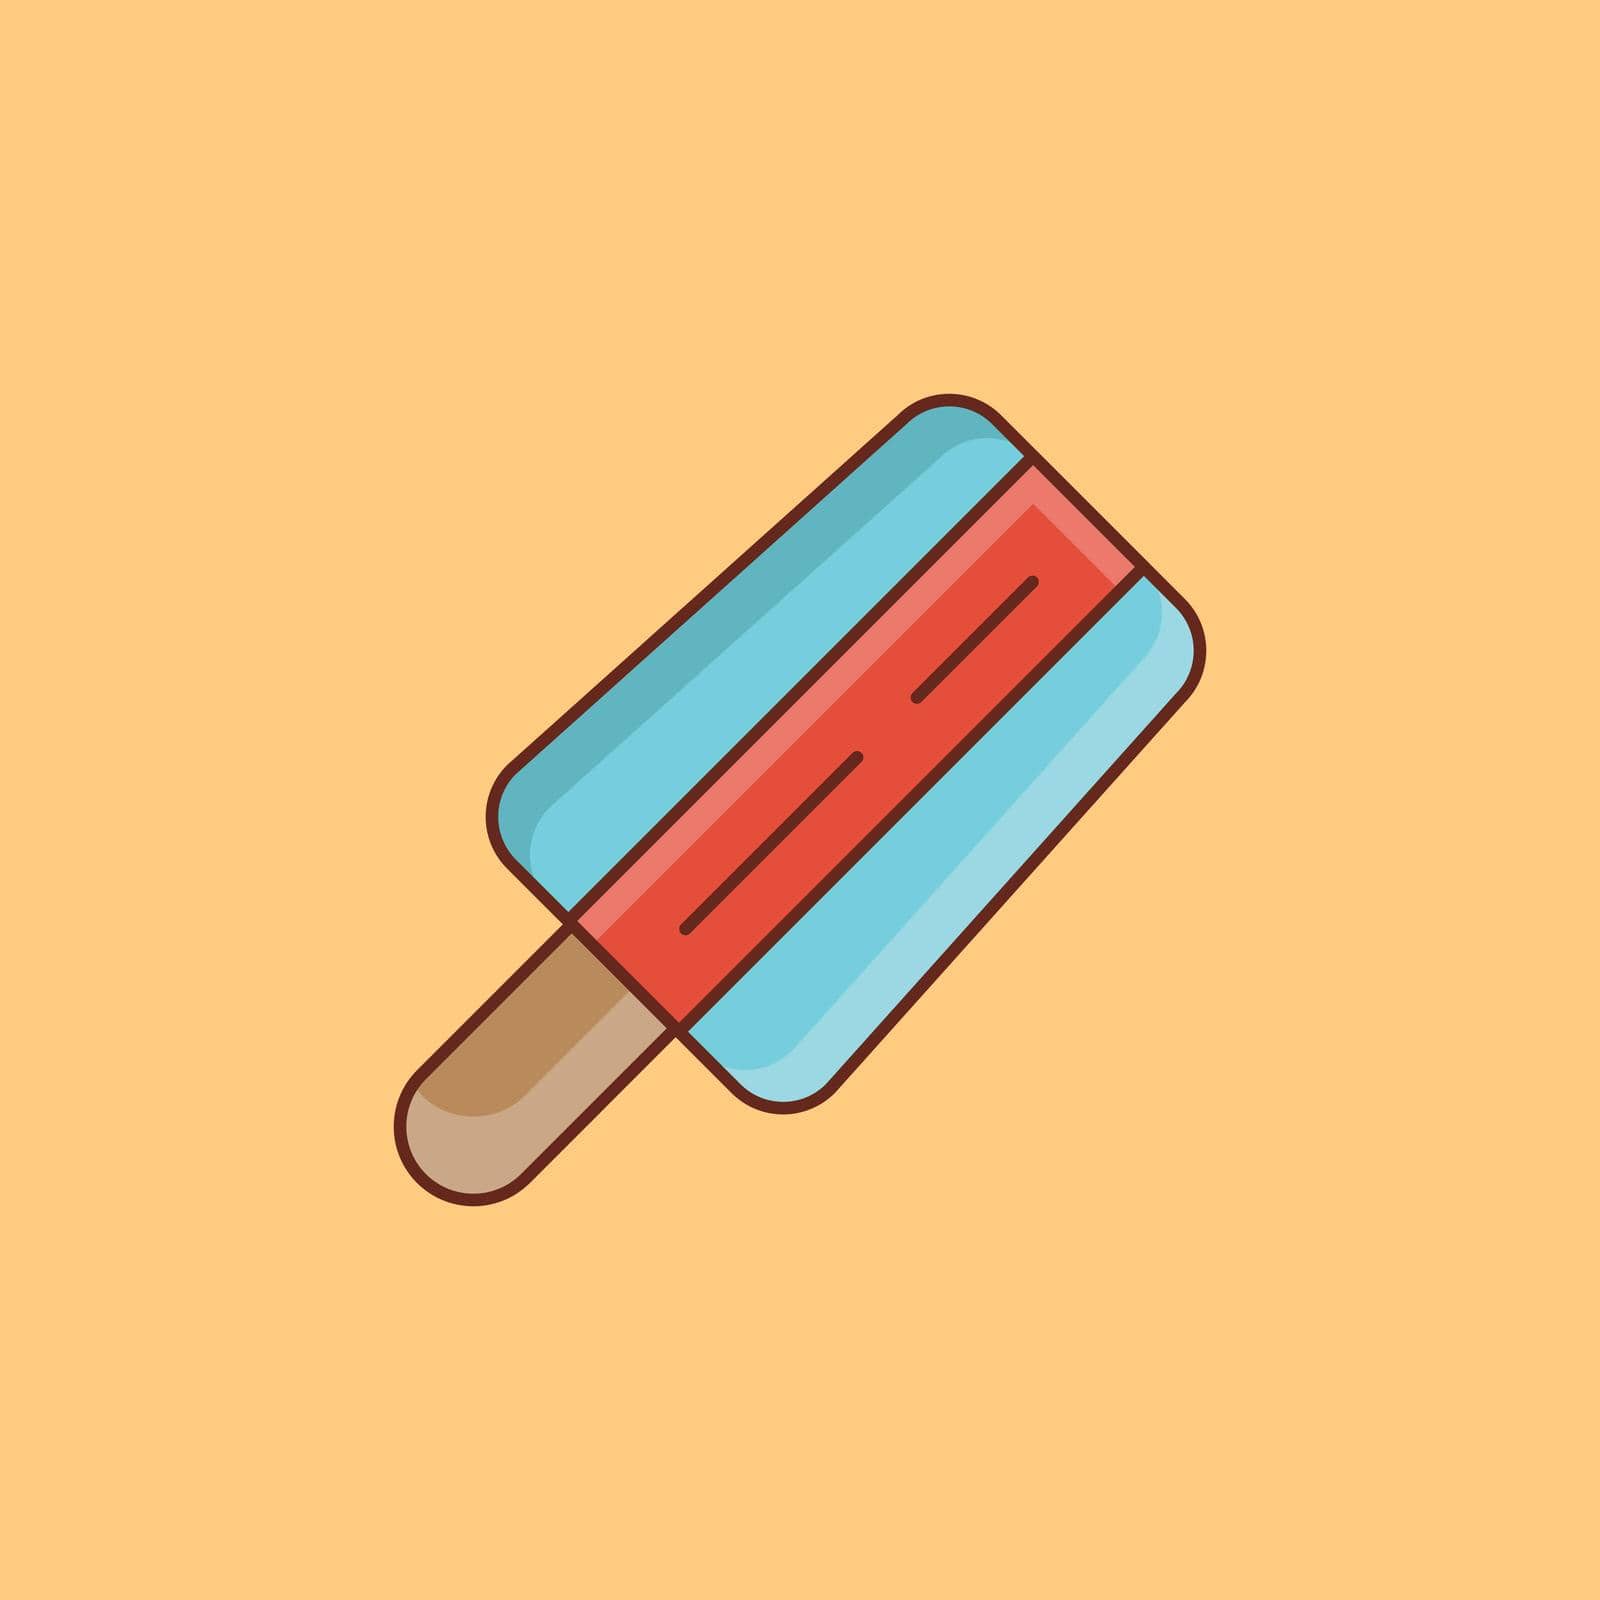 lolly by FlaticonsDesign